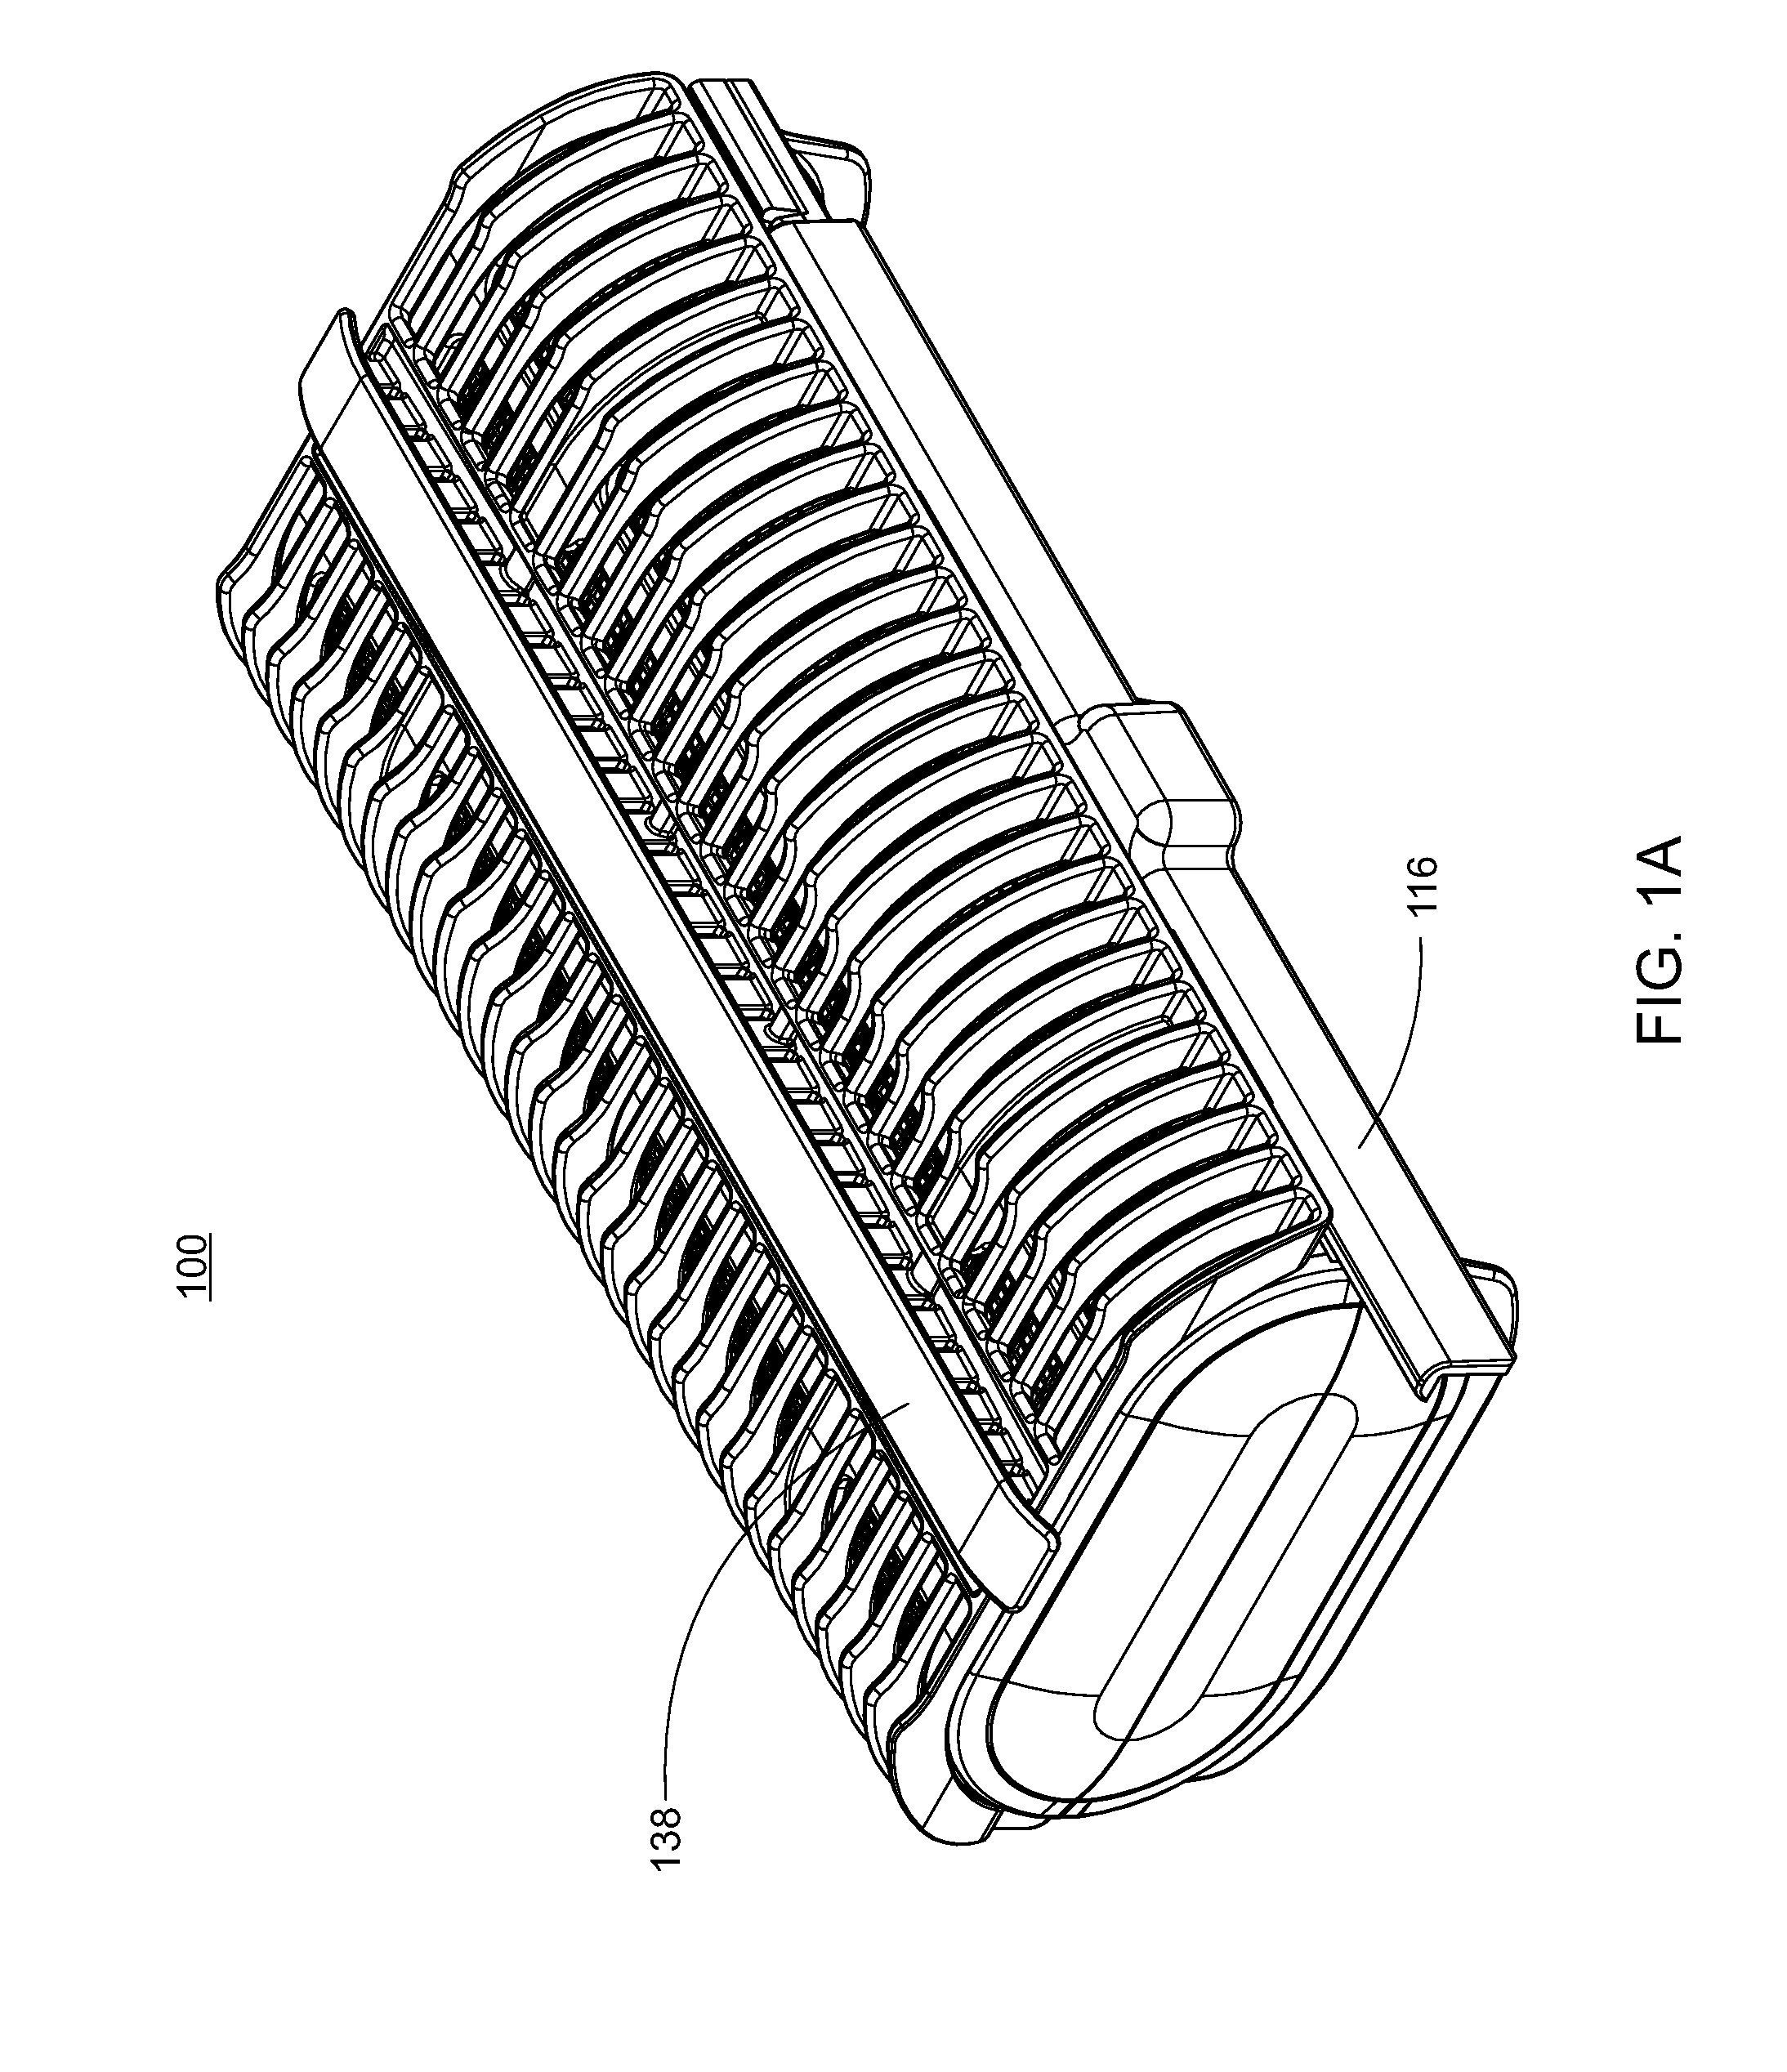 Apparatus and method for cleaning objects